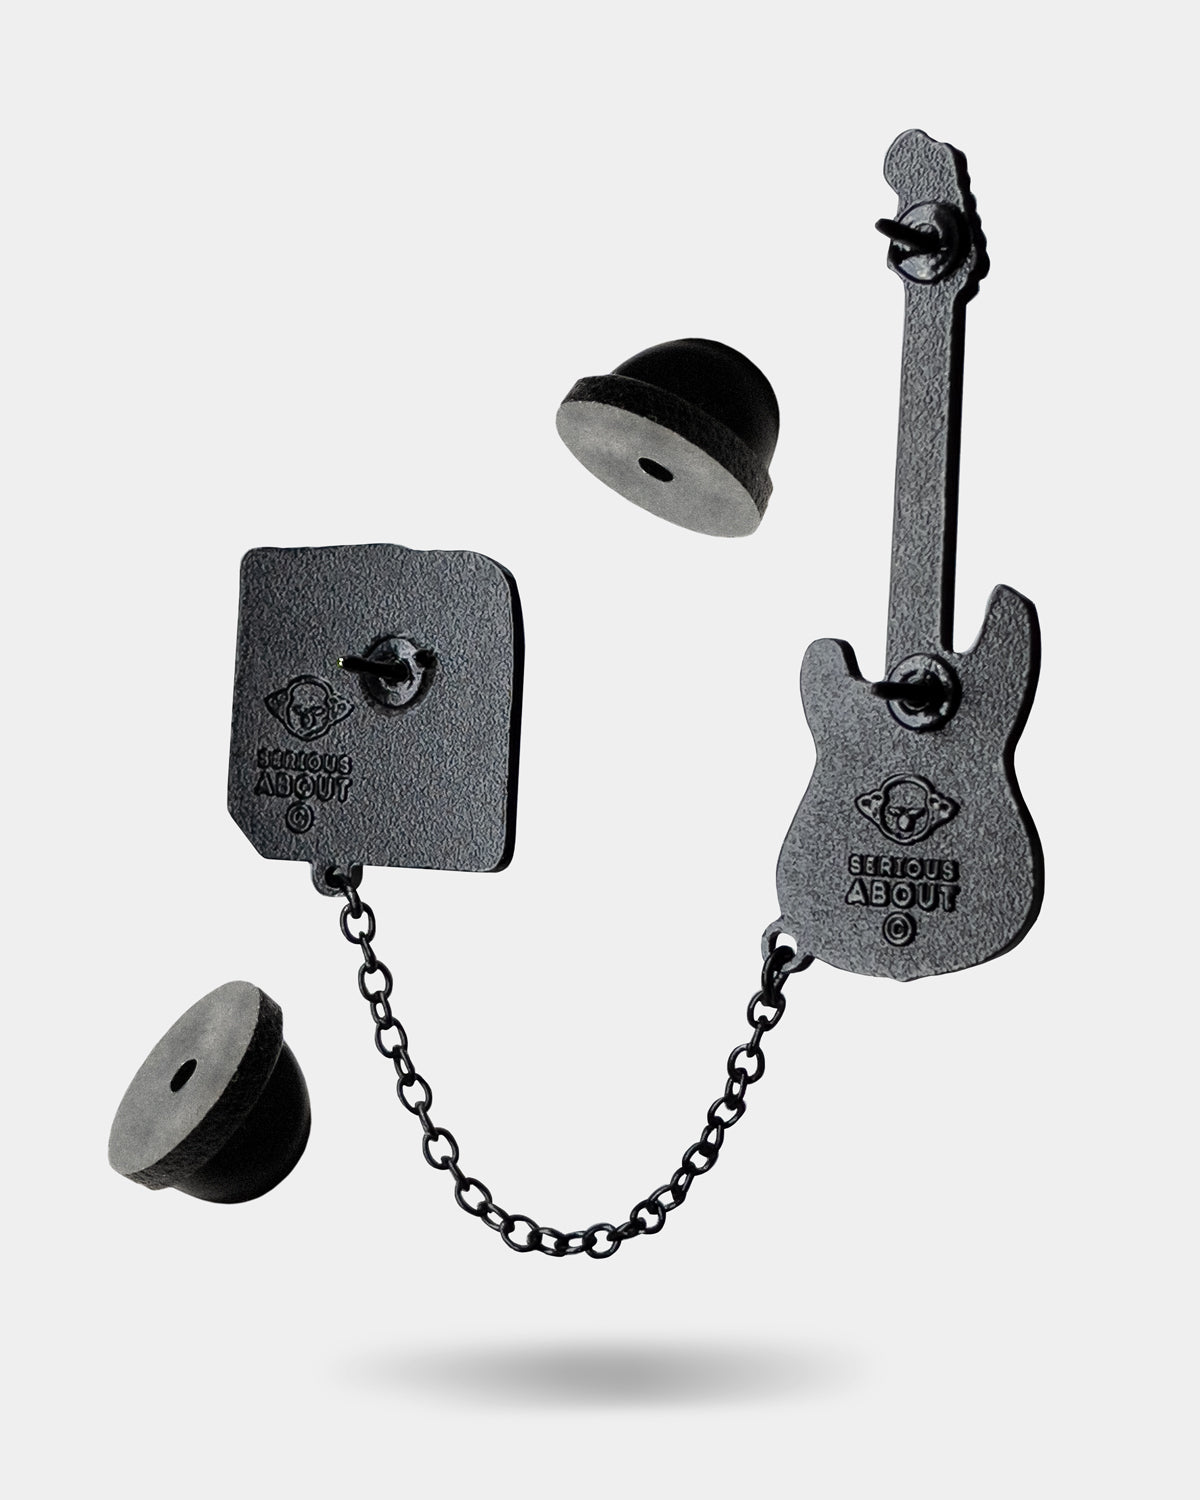 GUITAR COMBO BLACK, chained pin set